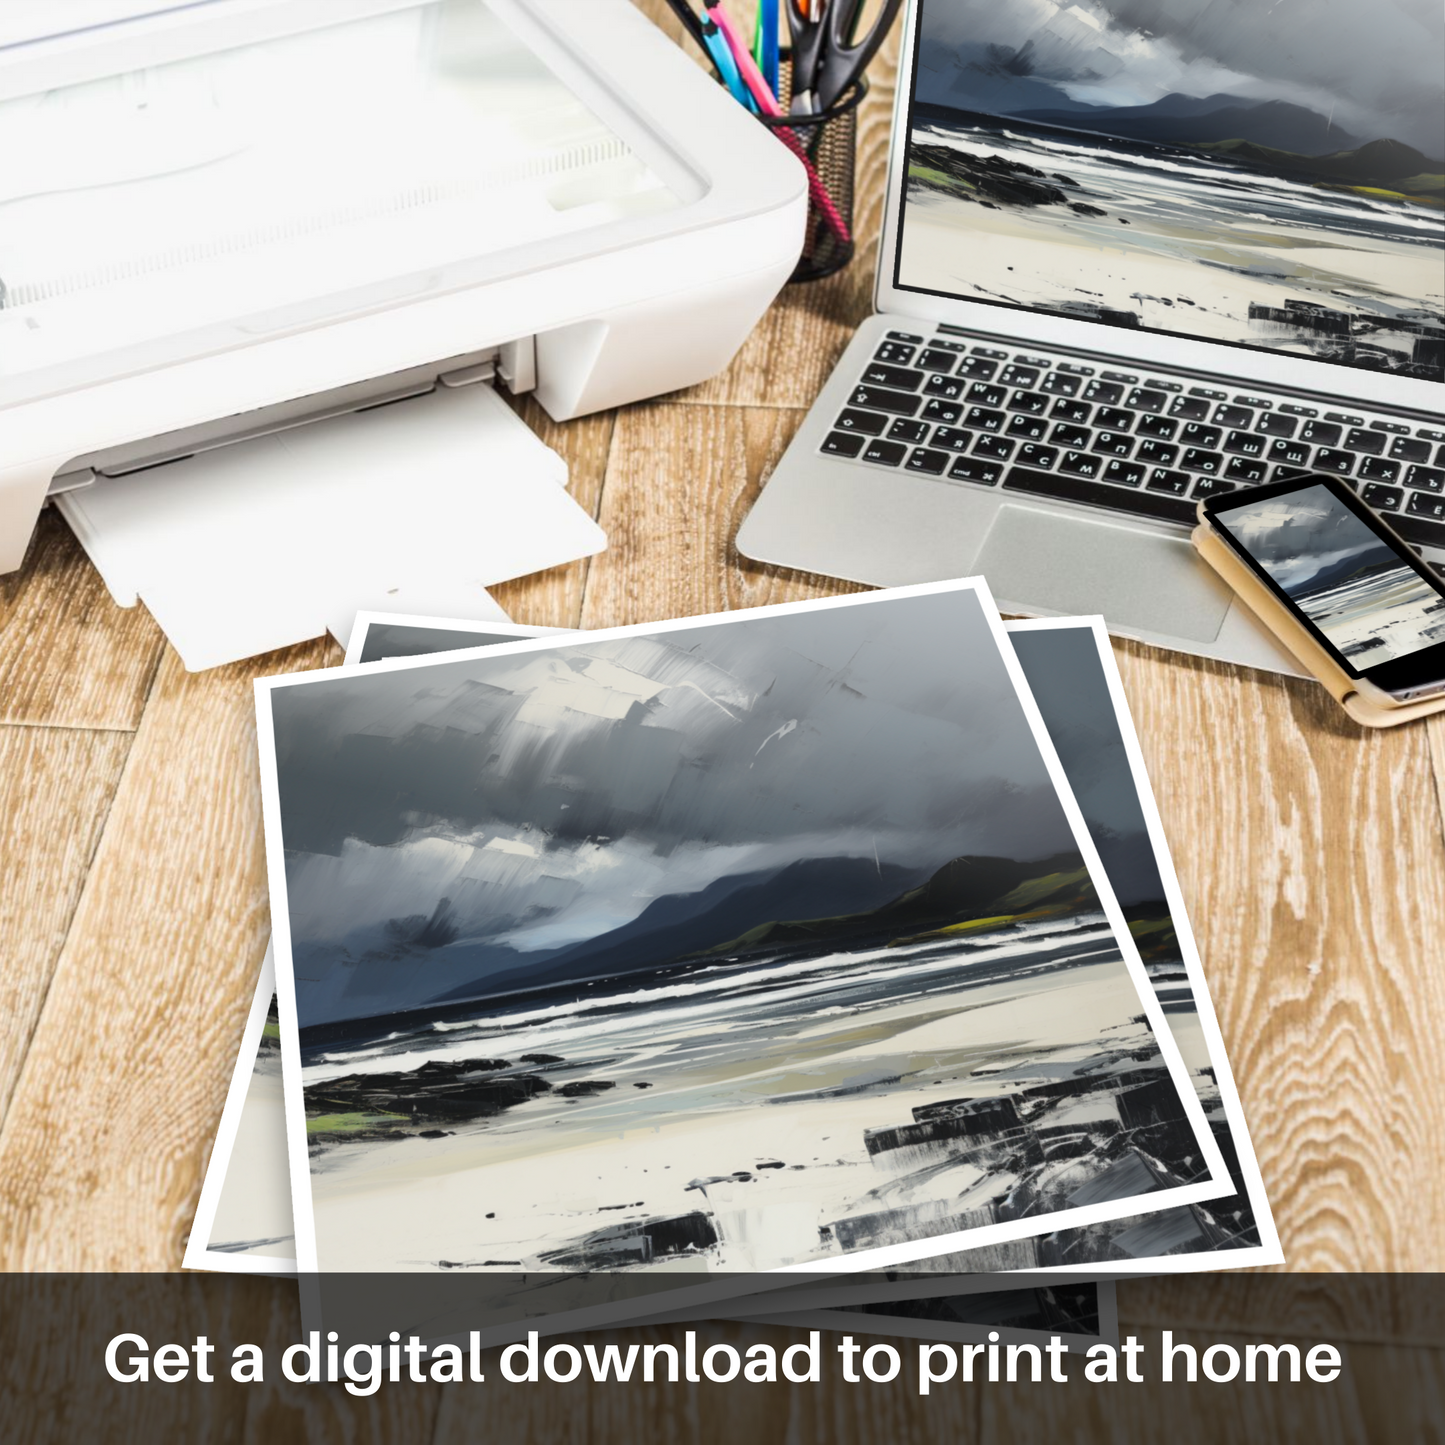 Downloadable and printable picture of Camusdarach Beach with a stormy sky